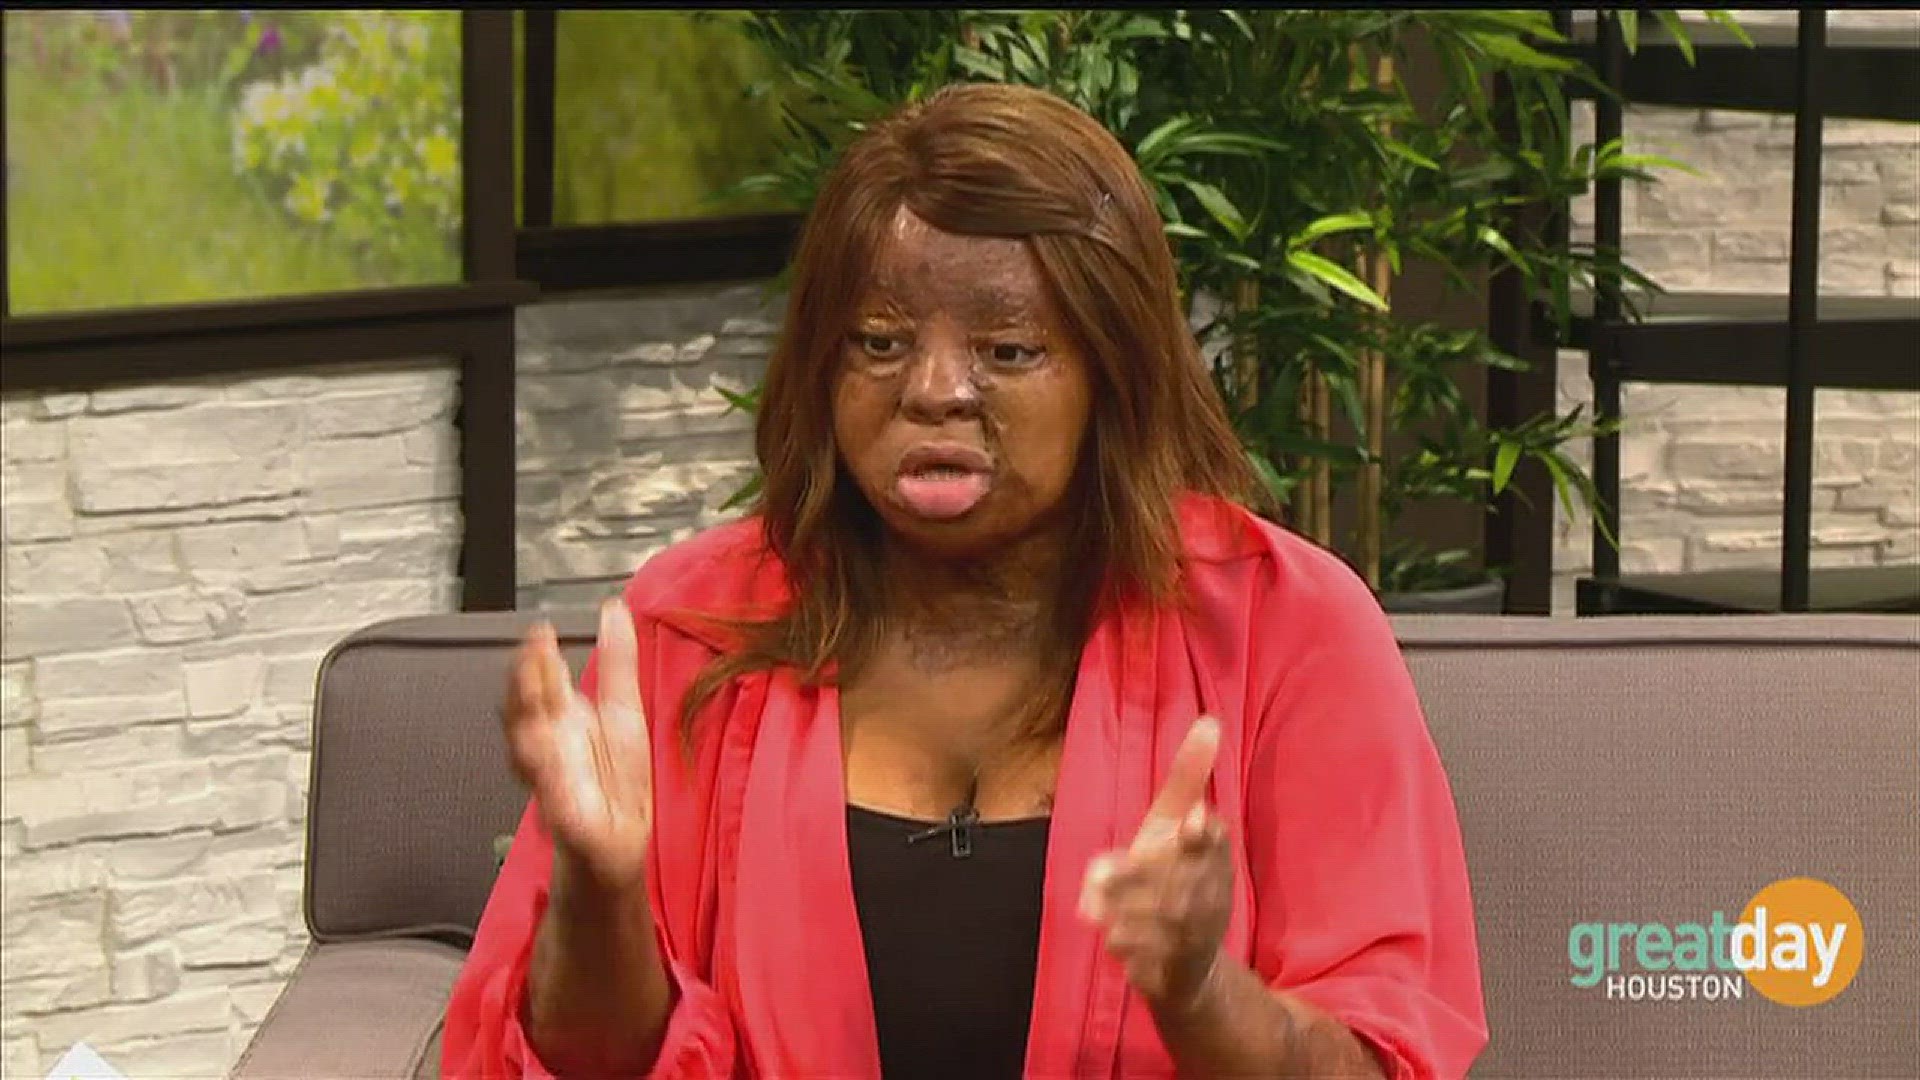 Nigerian plane crash survivor and "America's Got Talent" contestant, Kechi Okwuchi, shares how music helped her cope with tragedy.